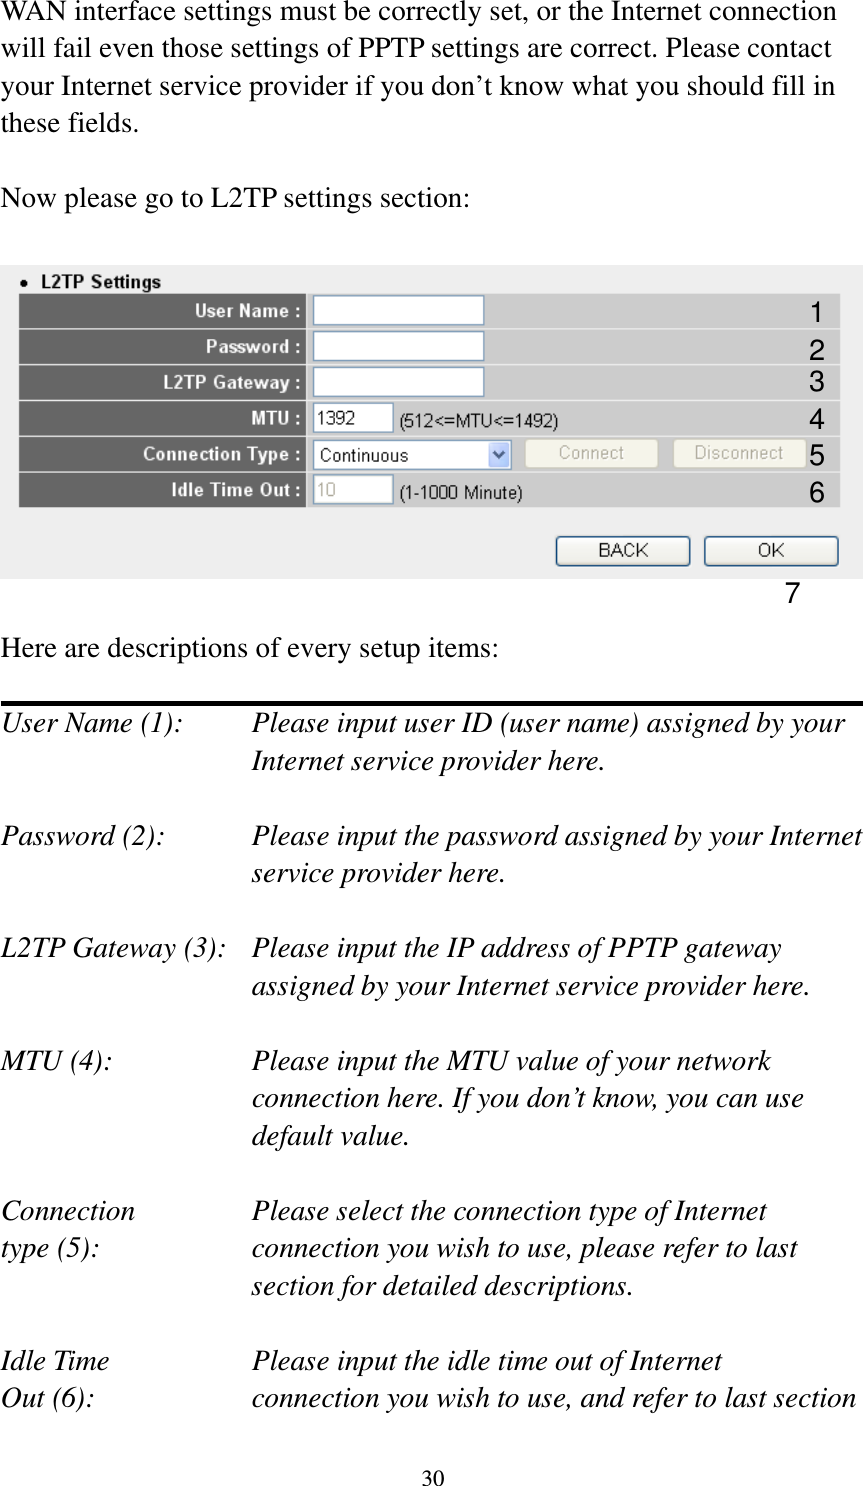 30 WAN interface settings must be correctly set, or the Internet connection will fail even those settings of PPTP settings are correct. Please contact your Internet service provider if you don’t know what you should fill in these fields.  Now please go to L2TP settings section:    Here are descriptions of every setup items:  User Name (1):     Please input user ID (user name) assigned by your      Internet service provider here.  Password (2):    Please input the password assigned by your Internet service provider here.  L2TP Gateway (3):   Please input the IP address of PPTP gateway assigned by your Internet service provider here.  MTU (4):    Please input the MTU value of your network connection here. If you don’t know, you can use default value.  Connection       Please select the connection type of Internet type (5):    connection you wish to use, please refer to last section for detailed descriptions.  Idle Time        Please input the idle time out of Internet Out (6):    connection you wish to use, and refer to last section 1 2 4 3 5 7 6 